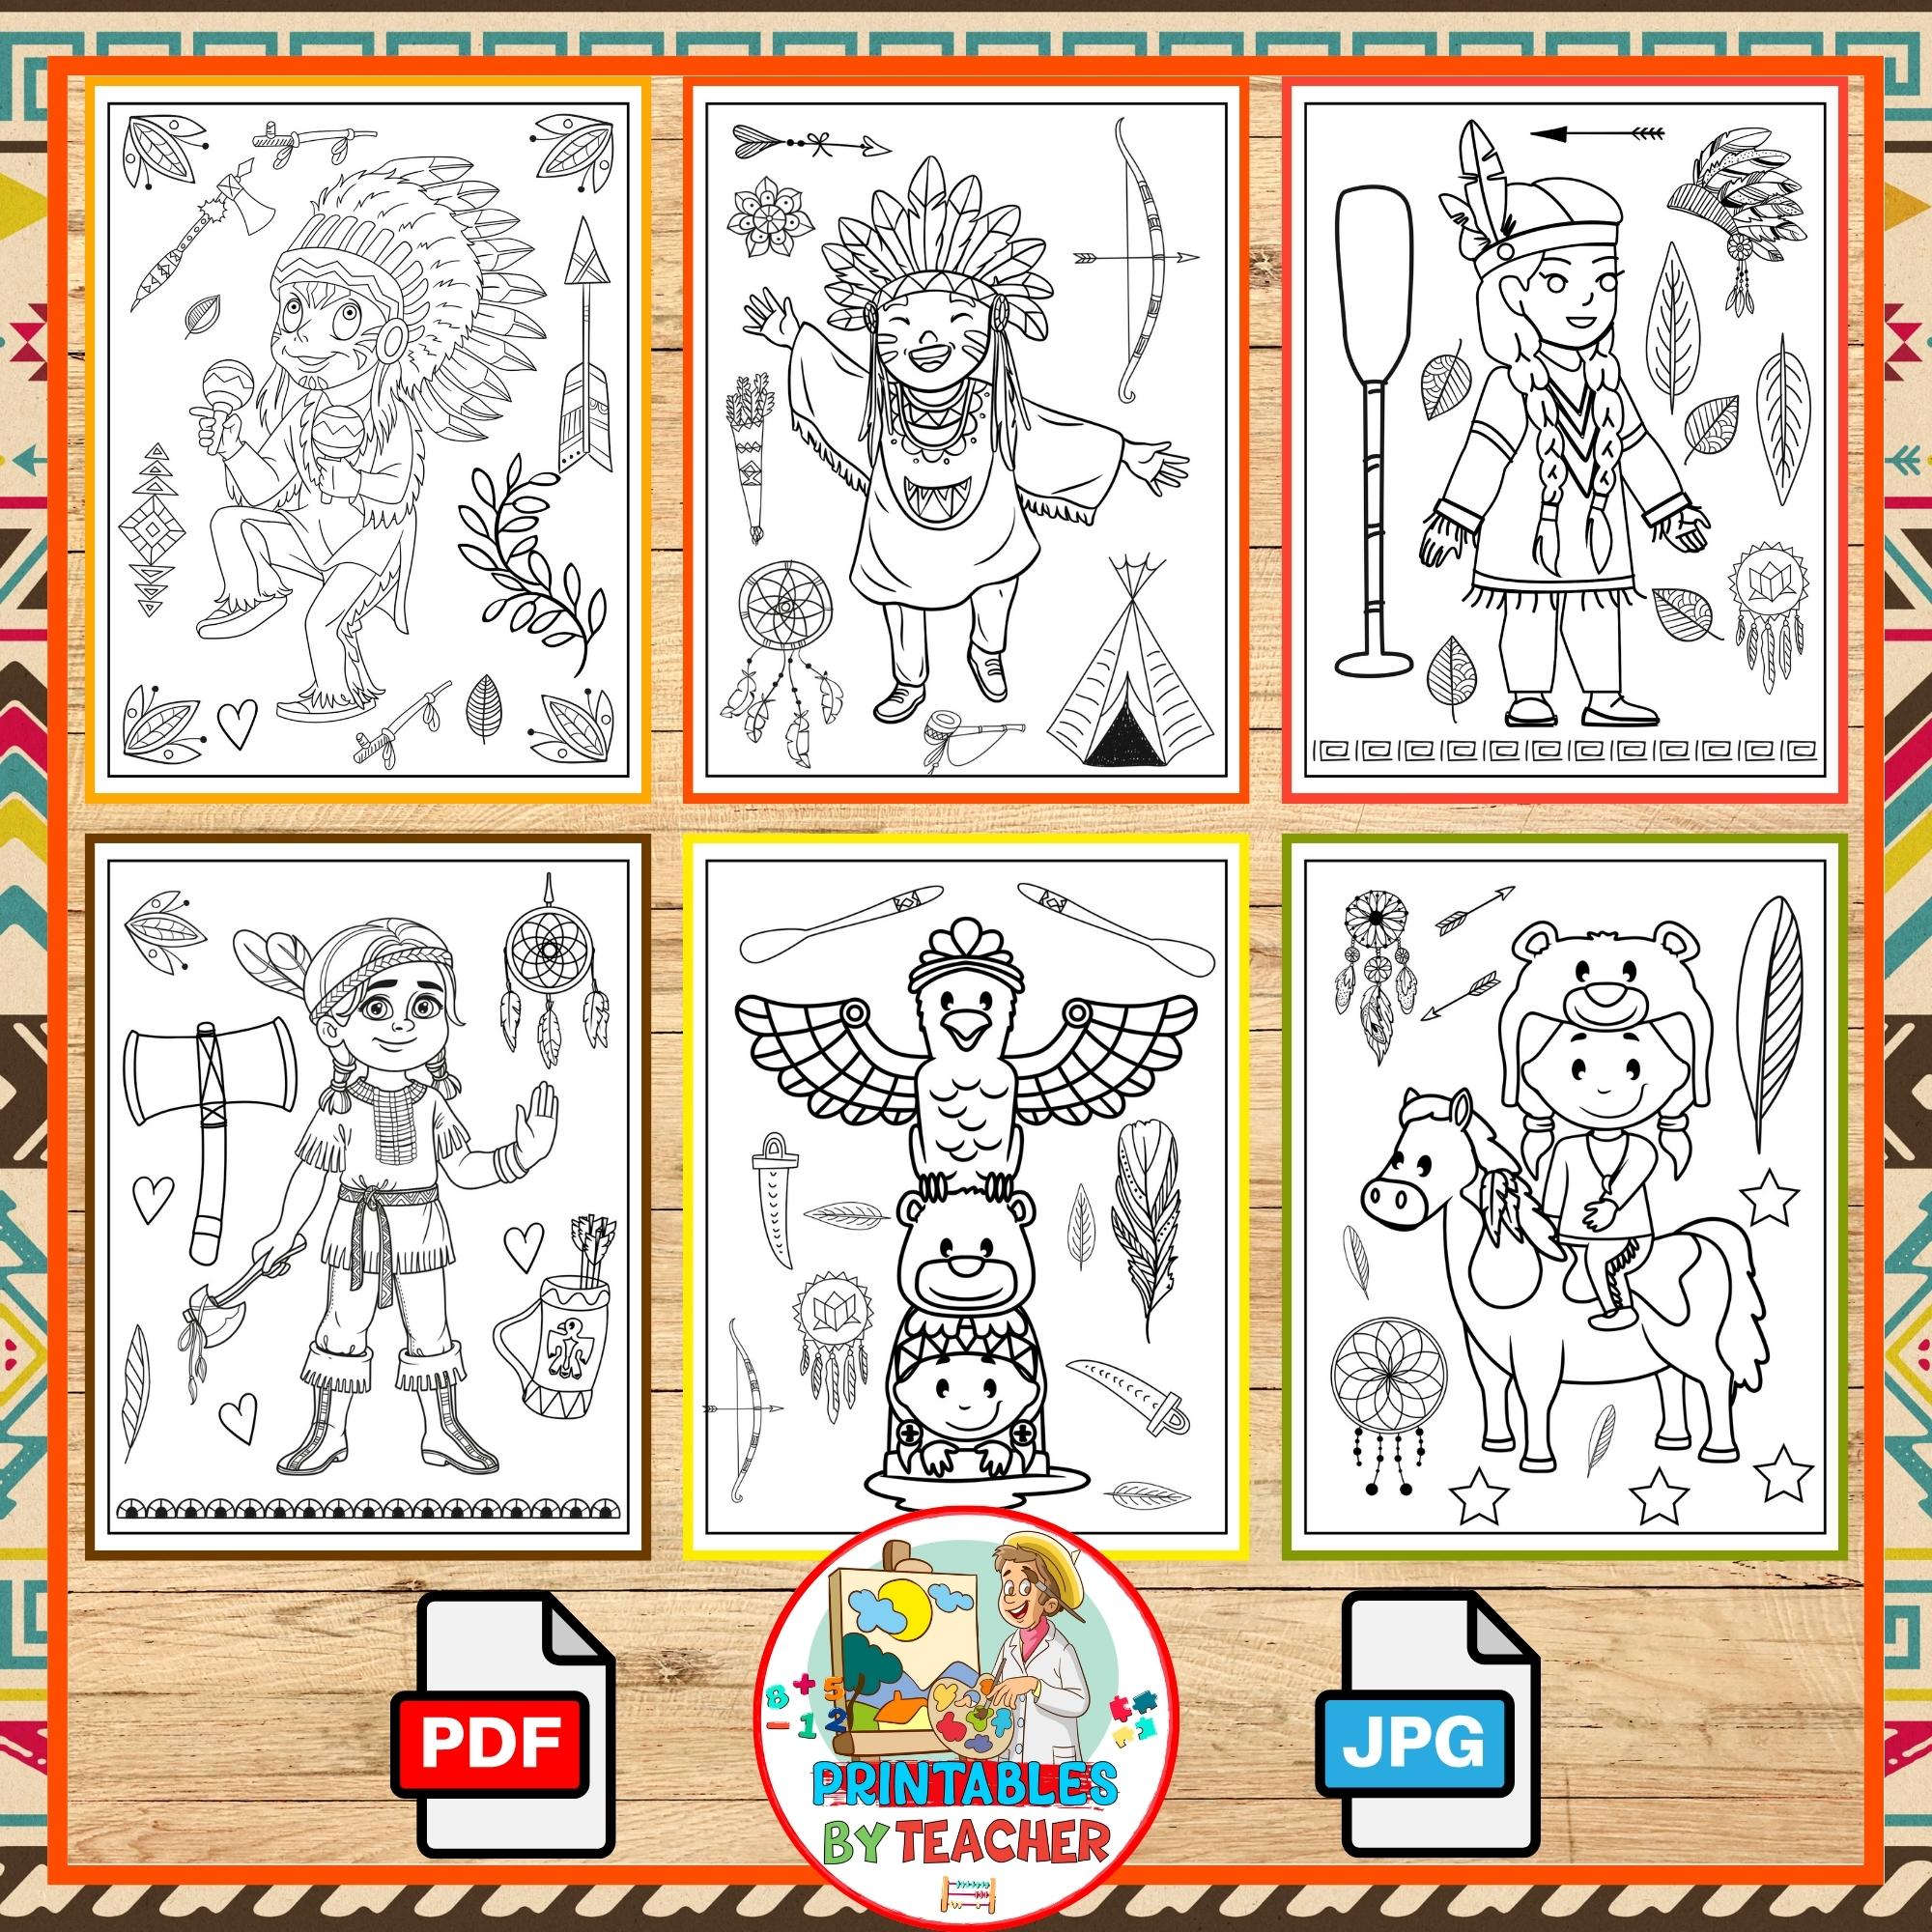 Native american heritage month coloring pages november activities